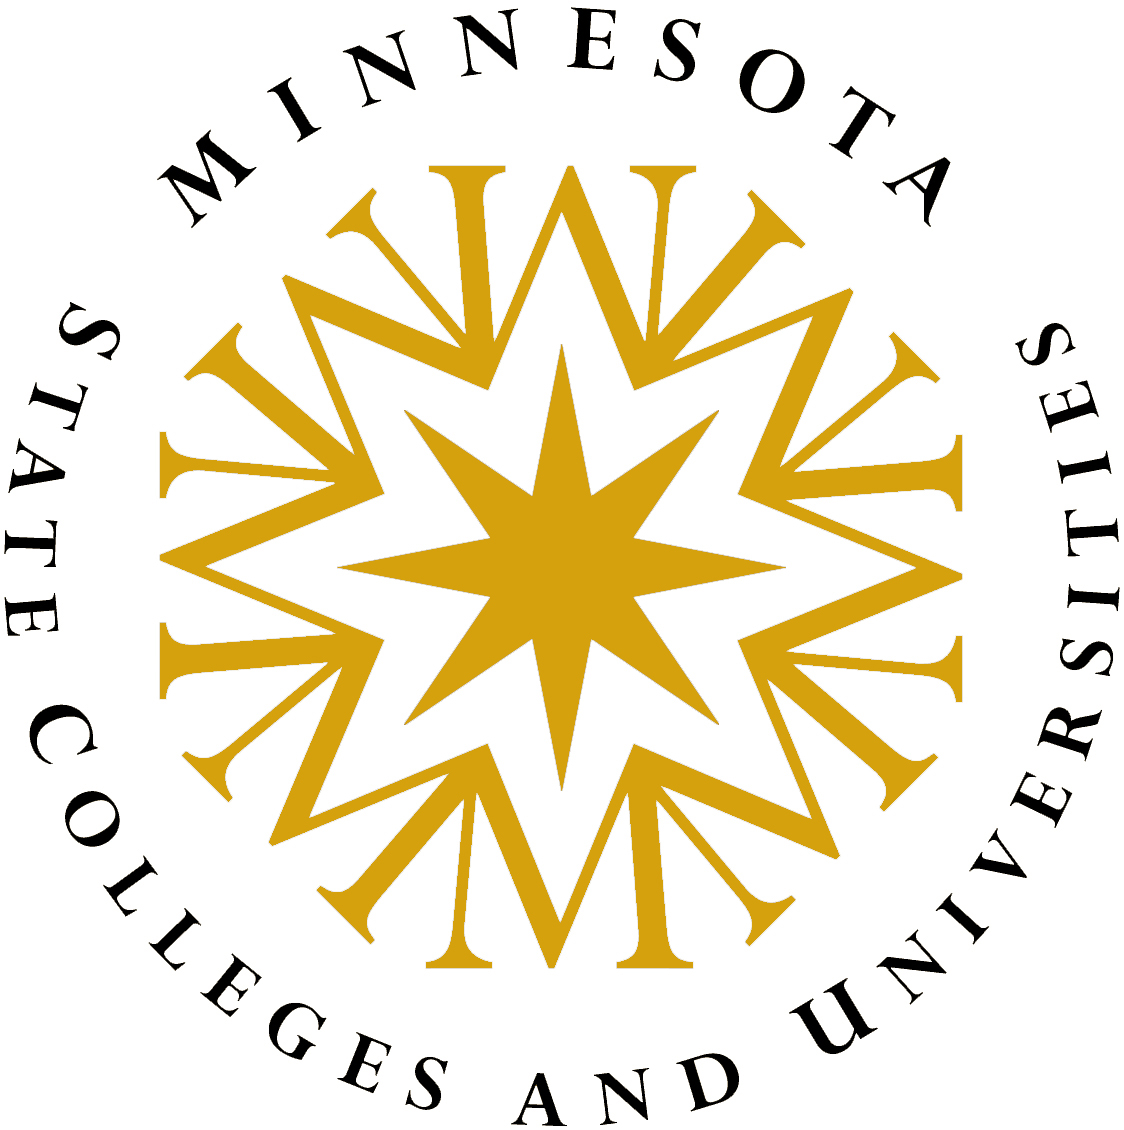 A new logo for Minnesota State College and University System